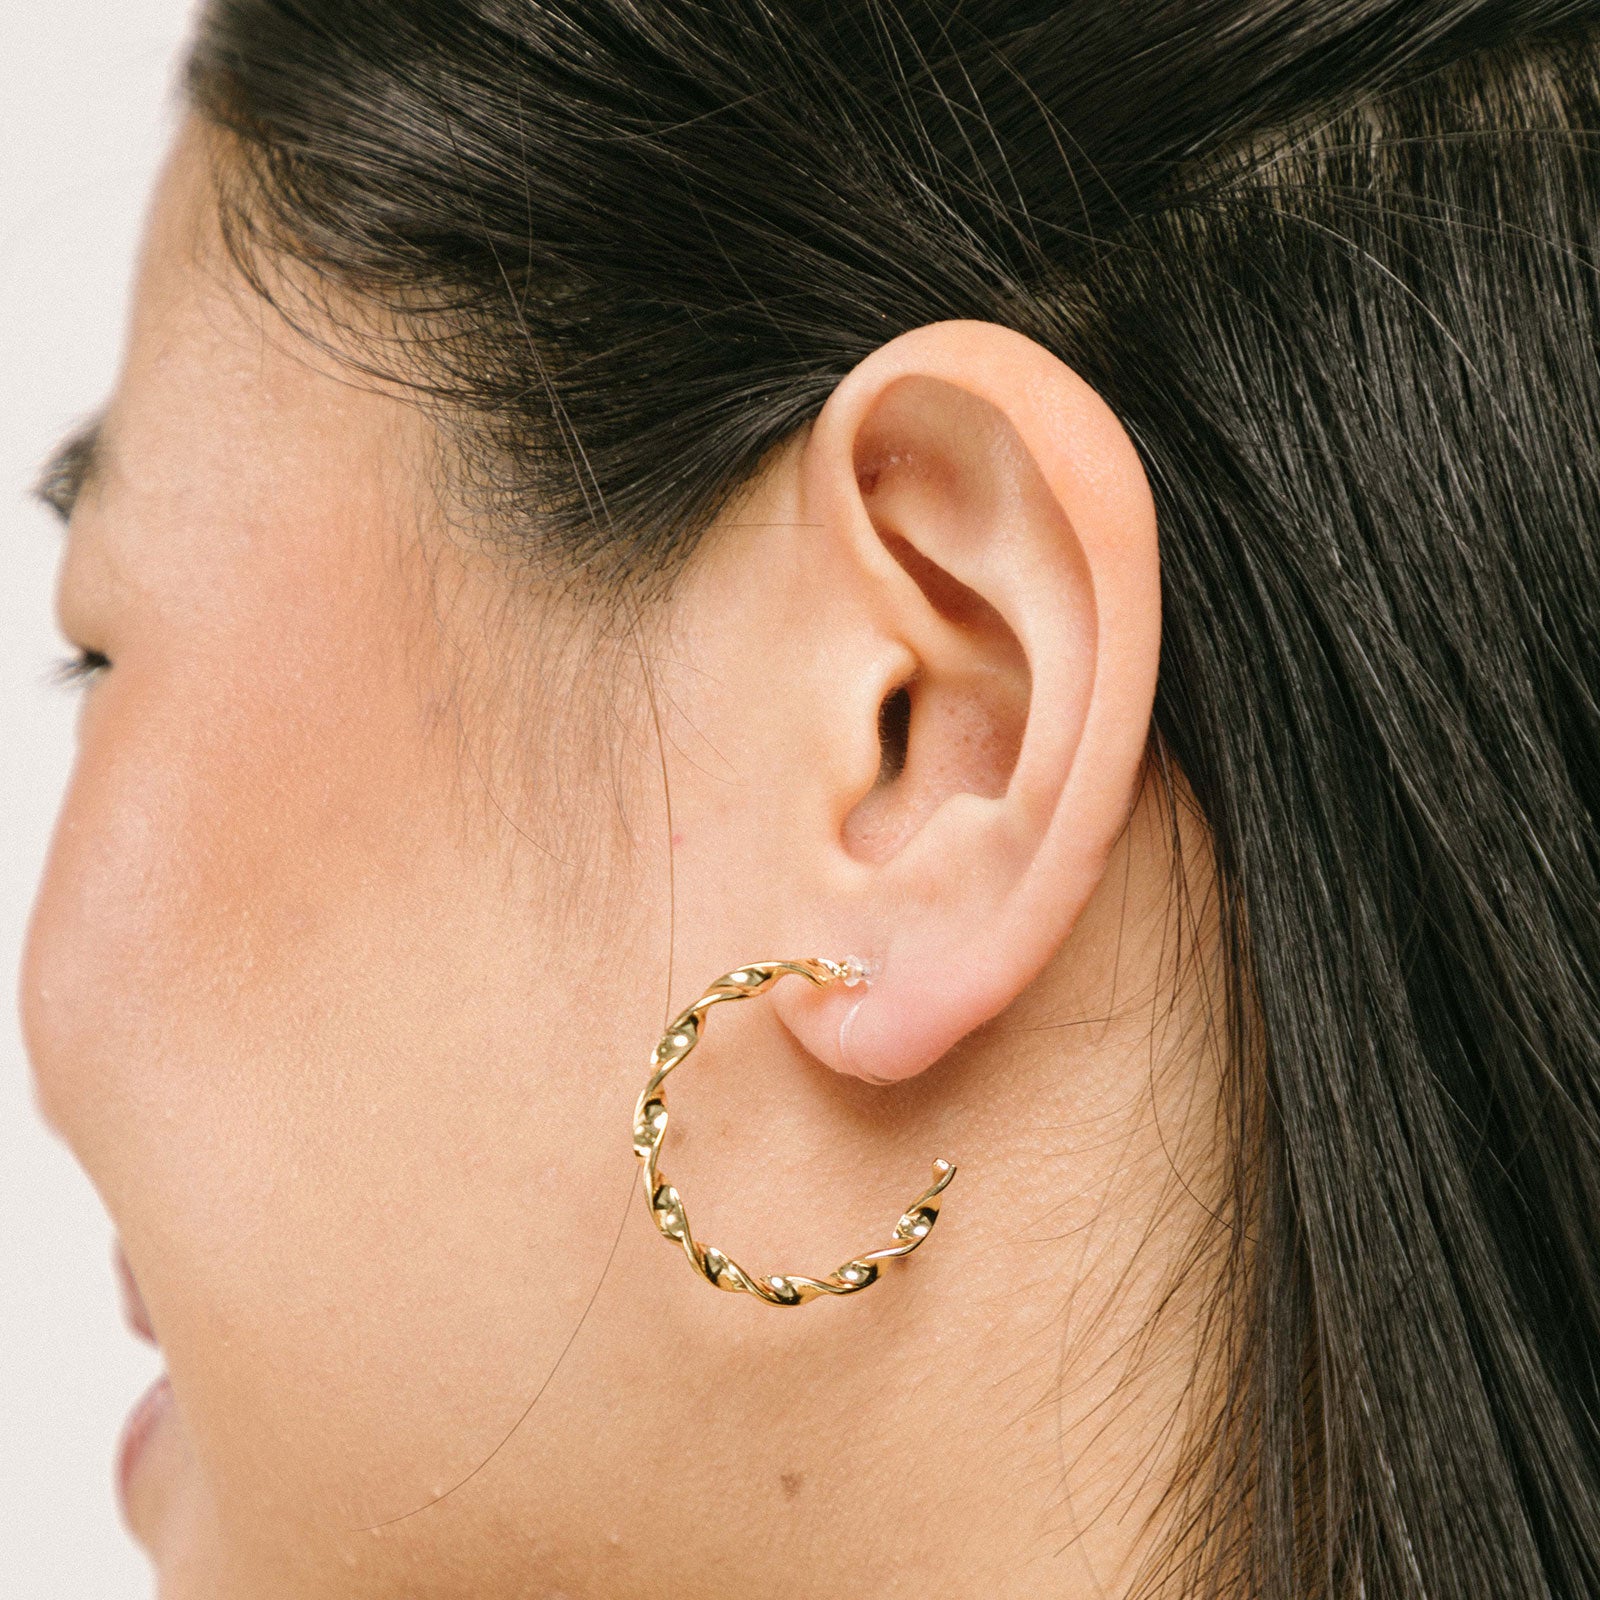 A model wearing the Gold Wave Hoop Clip-On Earrings boast a closure type of resin clip-on, ideal for the vast majority of ear types. Average wear duration ranges from 8-12 hours, offering medium secure hold with no ability to adjust. Crafted from gold tone metal alloy, this item comes as one pair and is also available in silver.